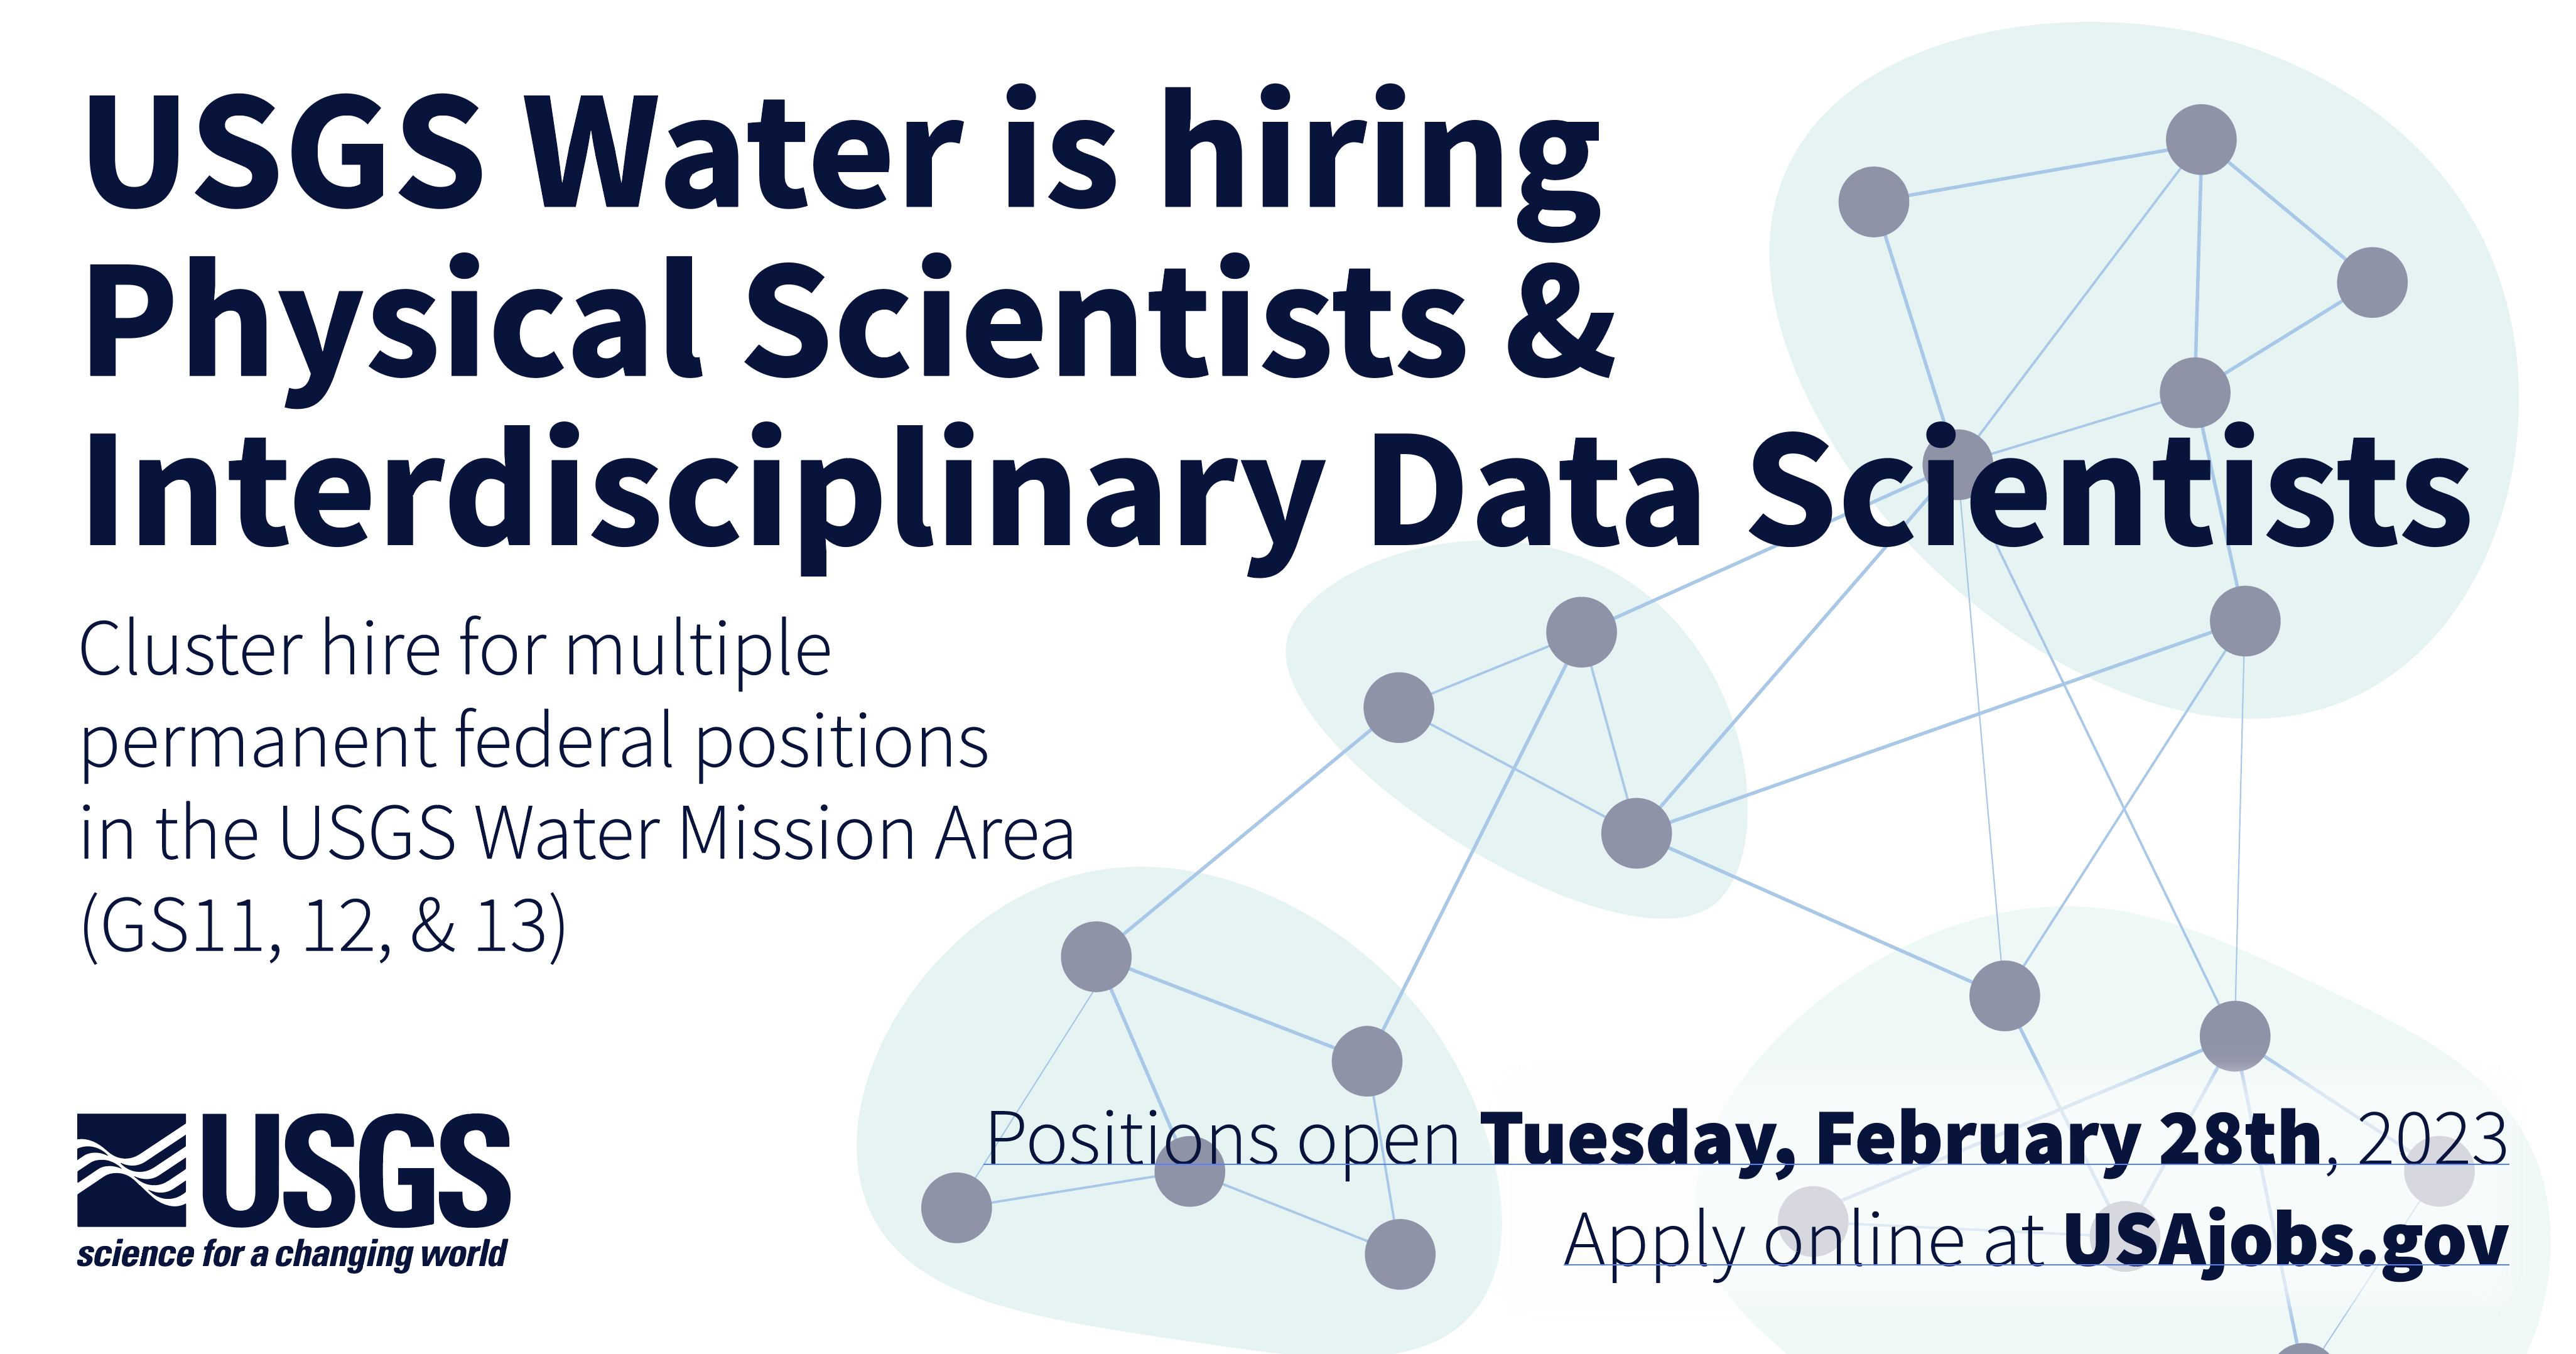 An banner announcing a cluster hire for Physical Scientists and Interdisciplinary Data Scientists in the USGS water mission area. There are multiple permanent federal positions open at GS11, 12, and 13. Applications opening Feb 28th 2023, apply online at usajobs.gov